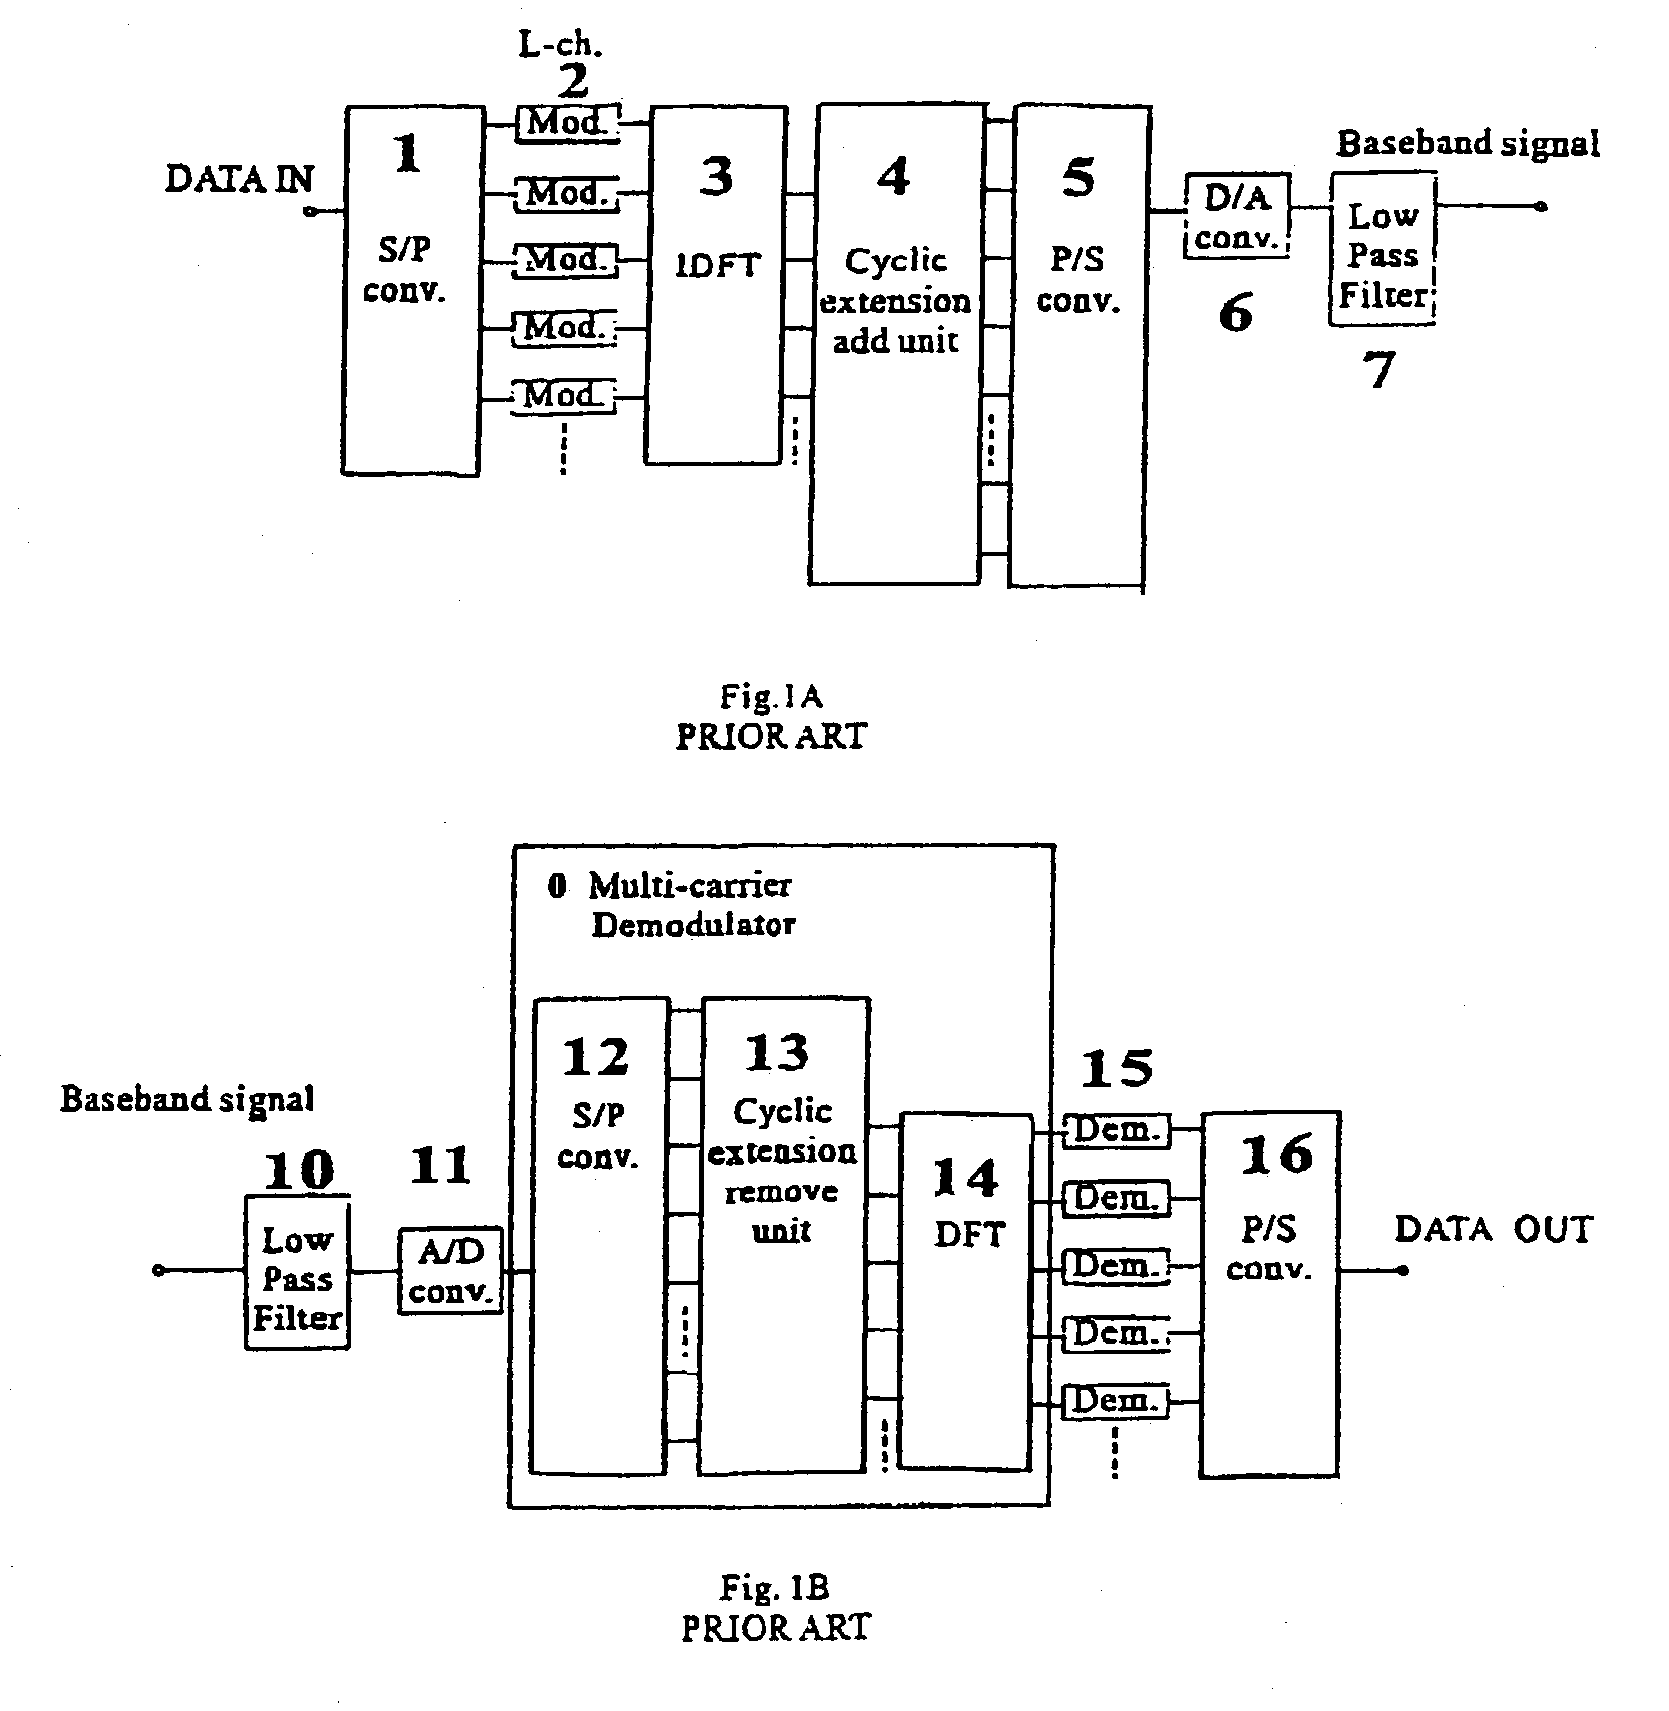 Method for co-channel interference cancellation in a multicarrier communication system